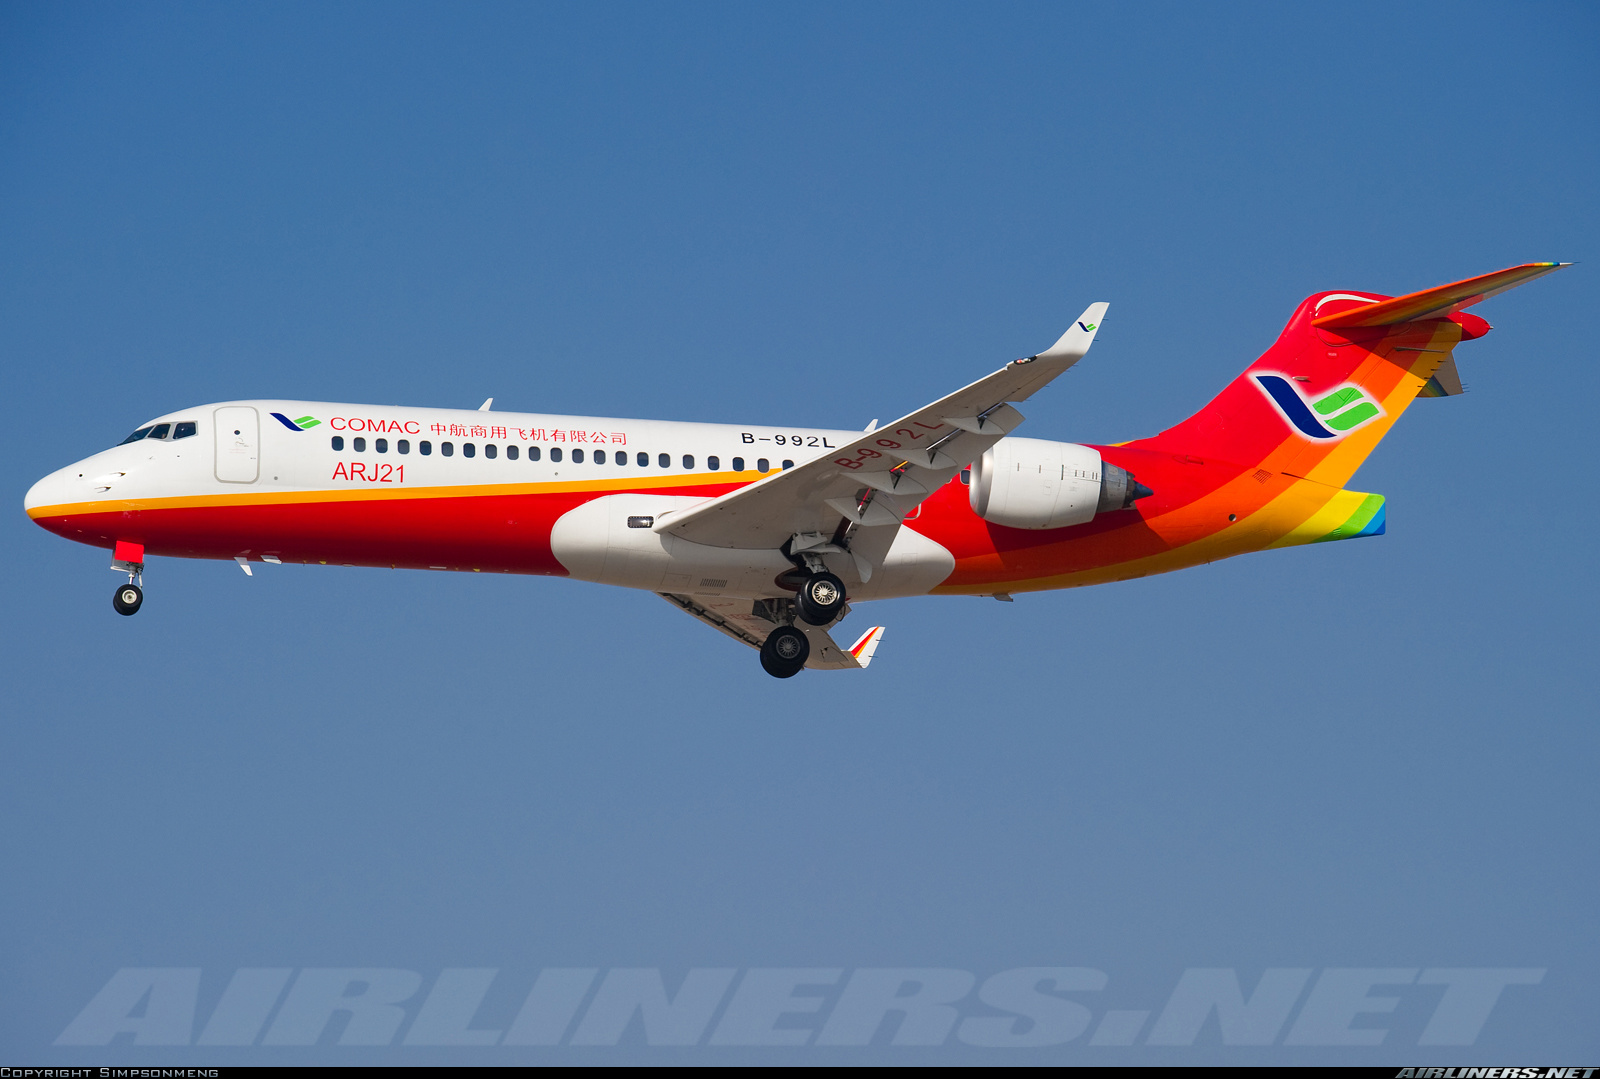 Aviation Photo #1672342        COMAC ARJ21-700 Xiangfeng - COMAC - Commercial Aircraft Corporation Of China